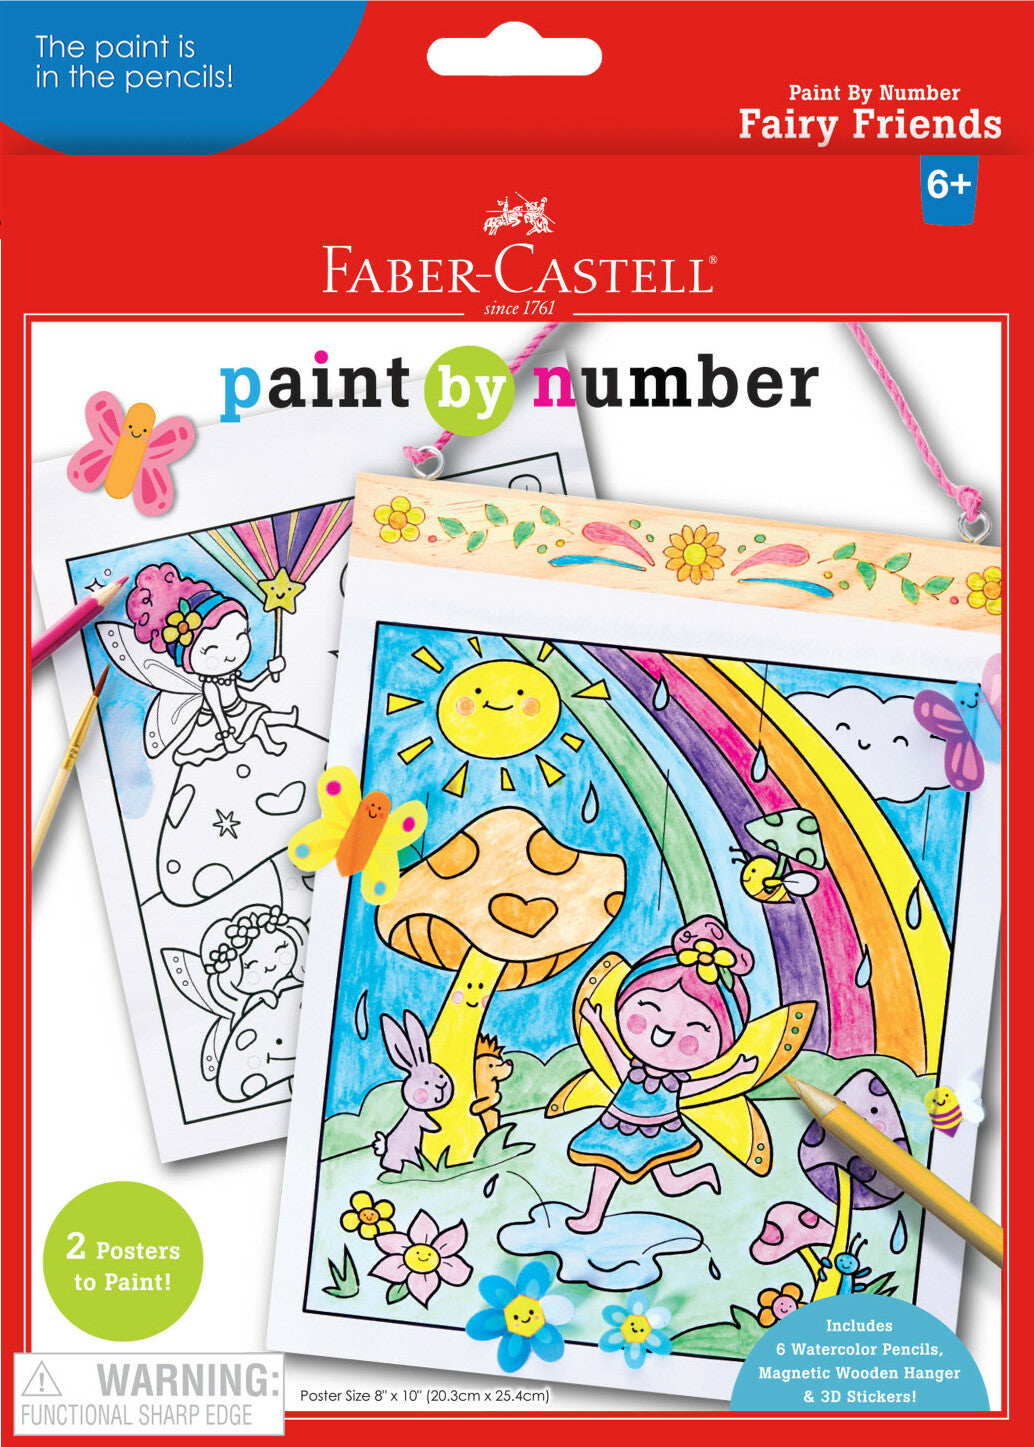 Faber-Castell Paint by Number Watercolor Produce